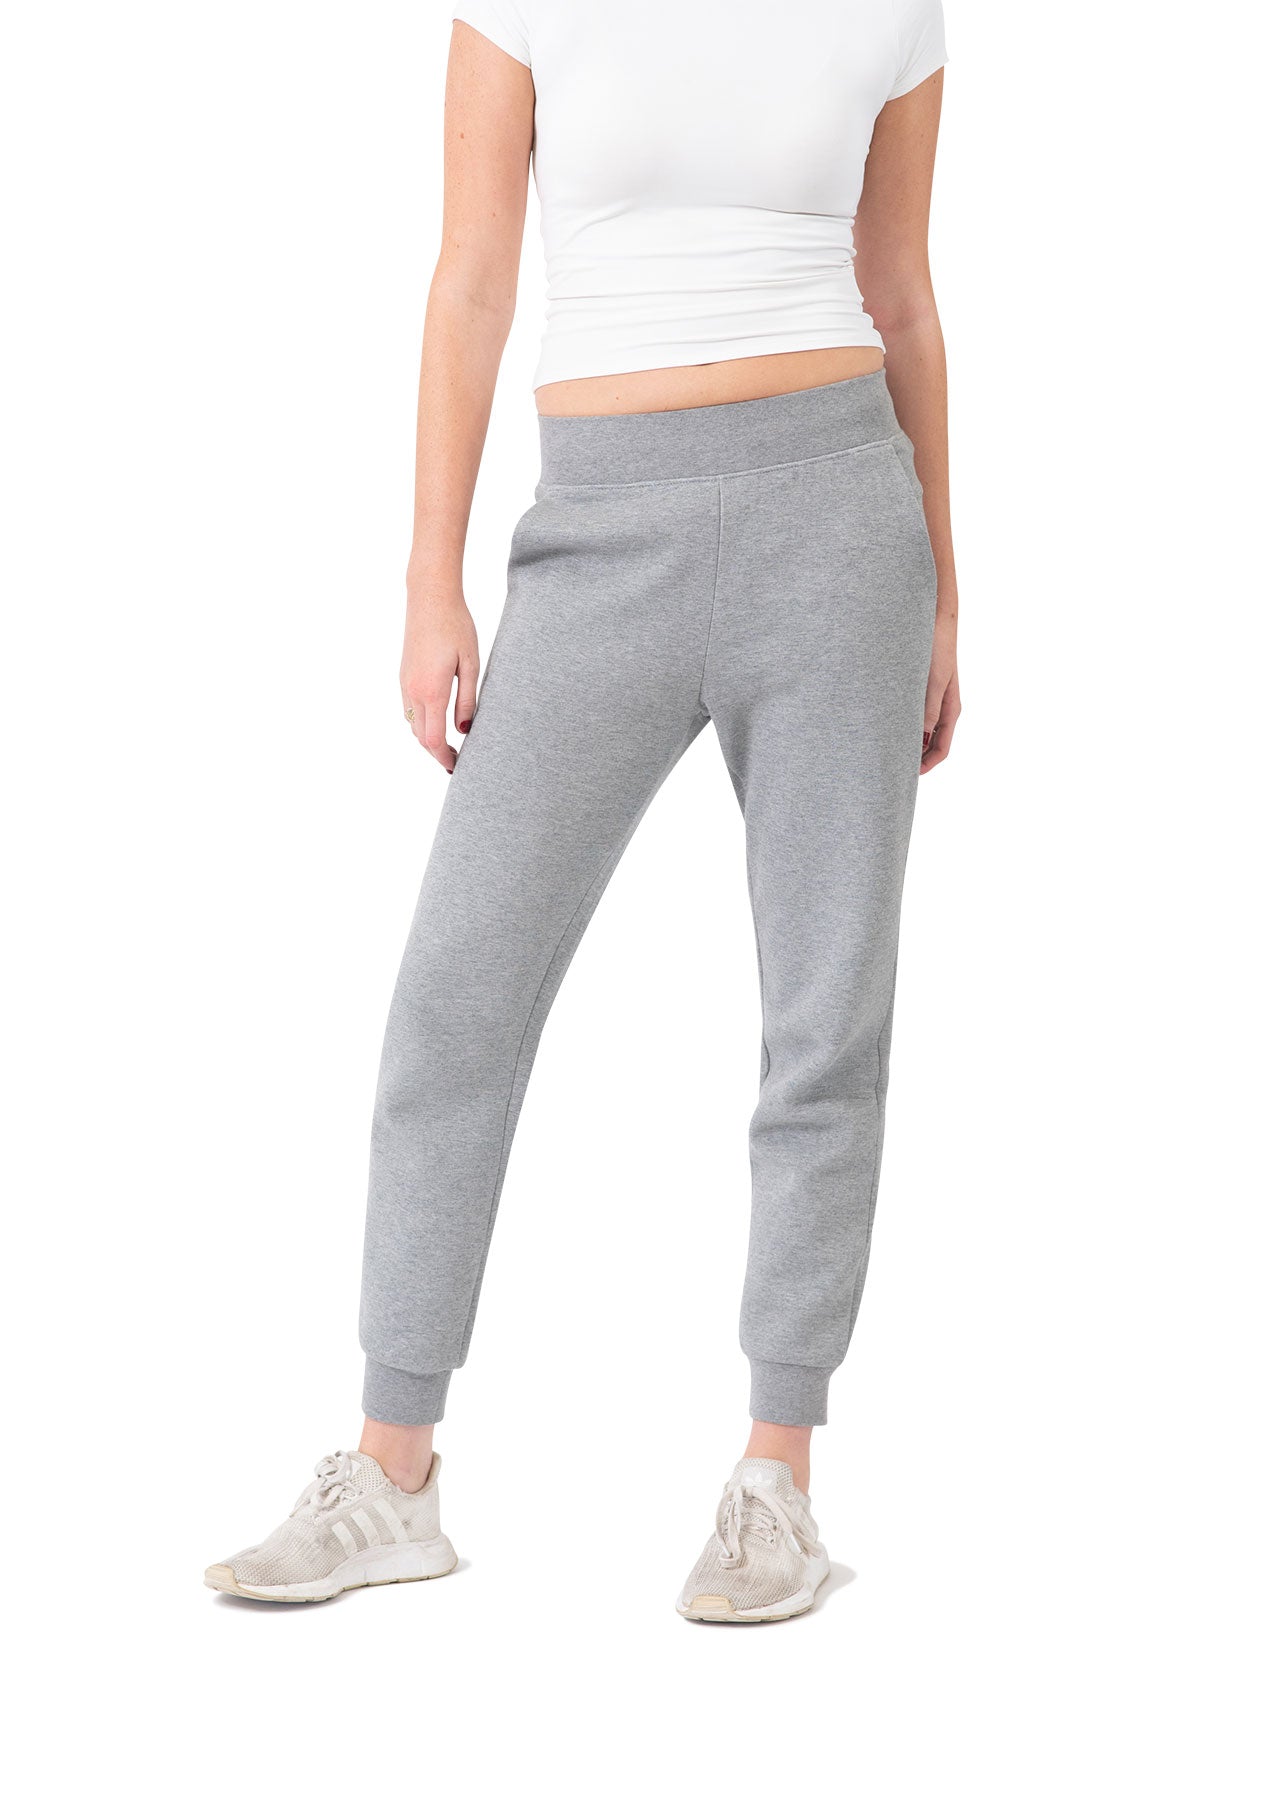 Update more than 89 converse track pants online india - in.eteachers